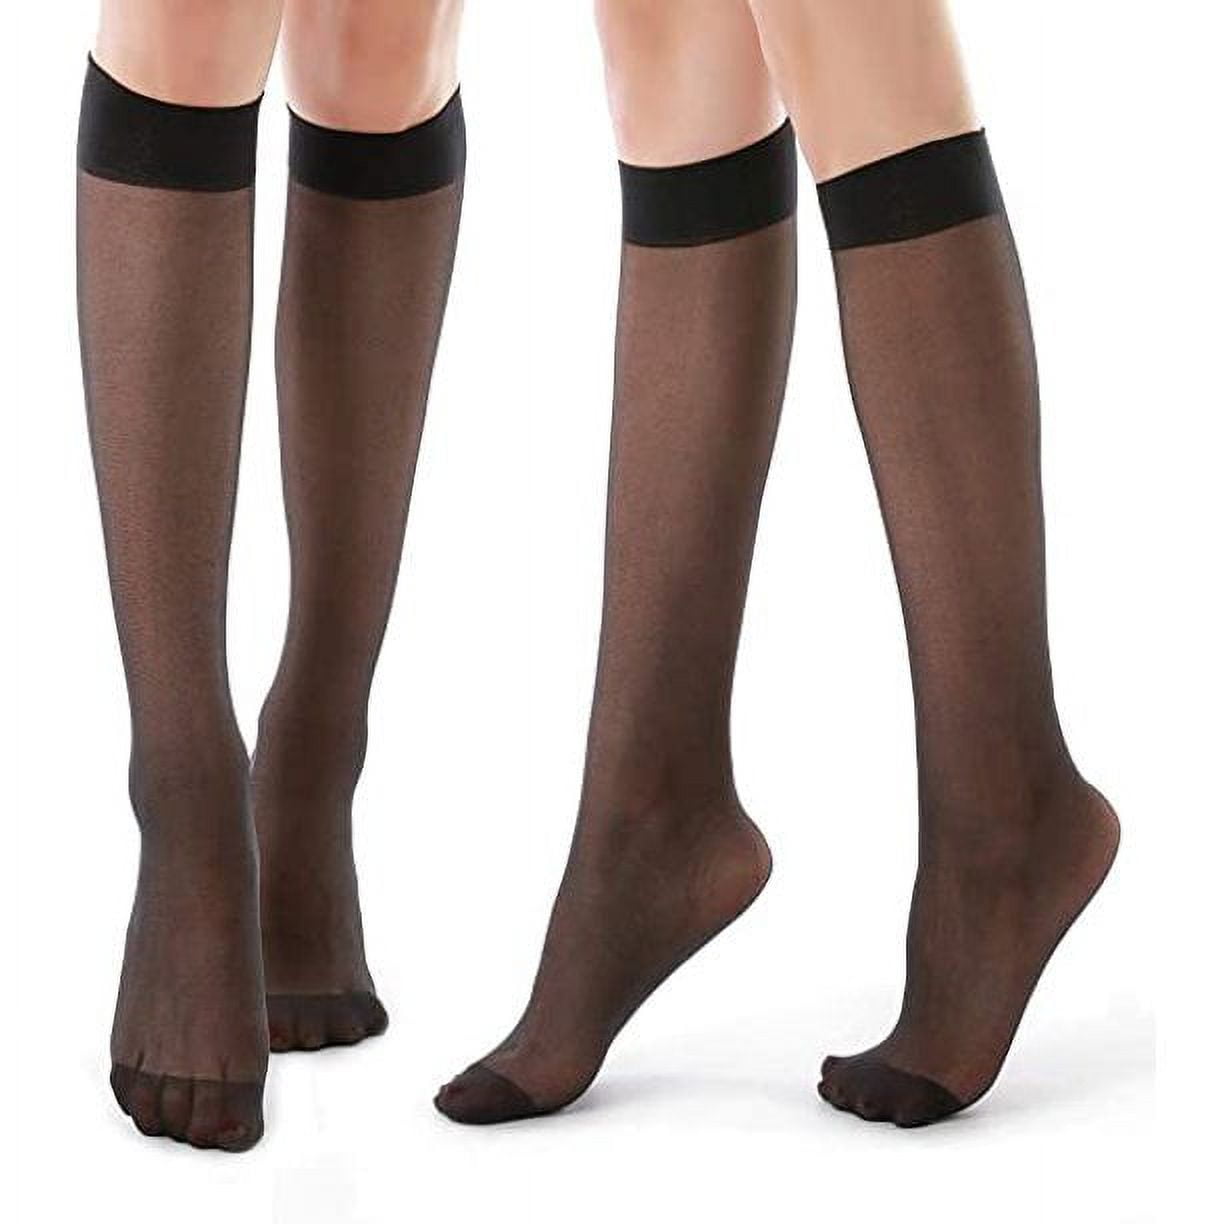 9 Pairs Knee High Pantyhose with Reinforced Toe - 20D Nylon Stockings ...